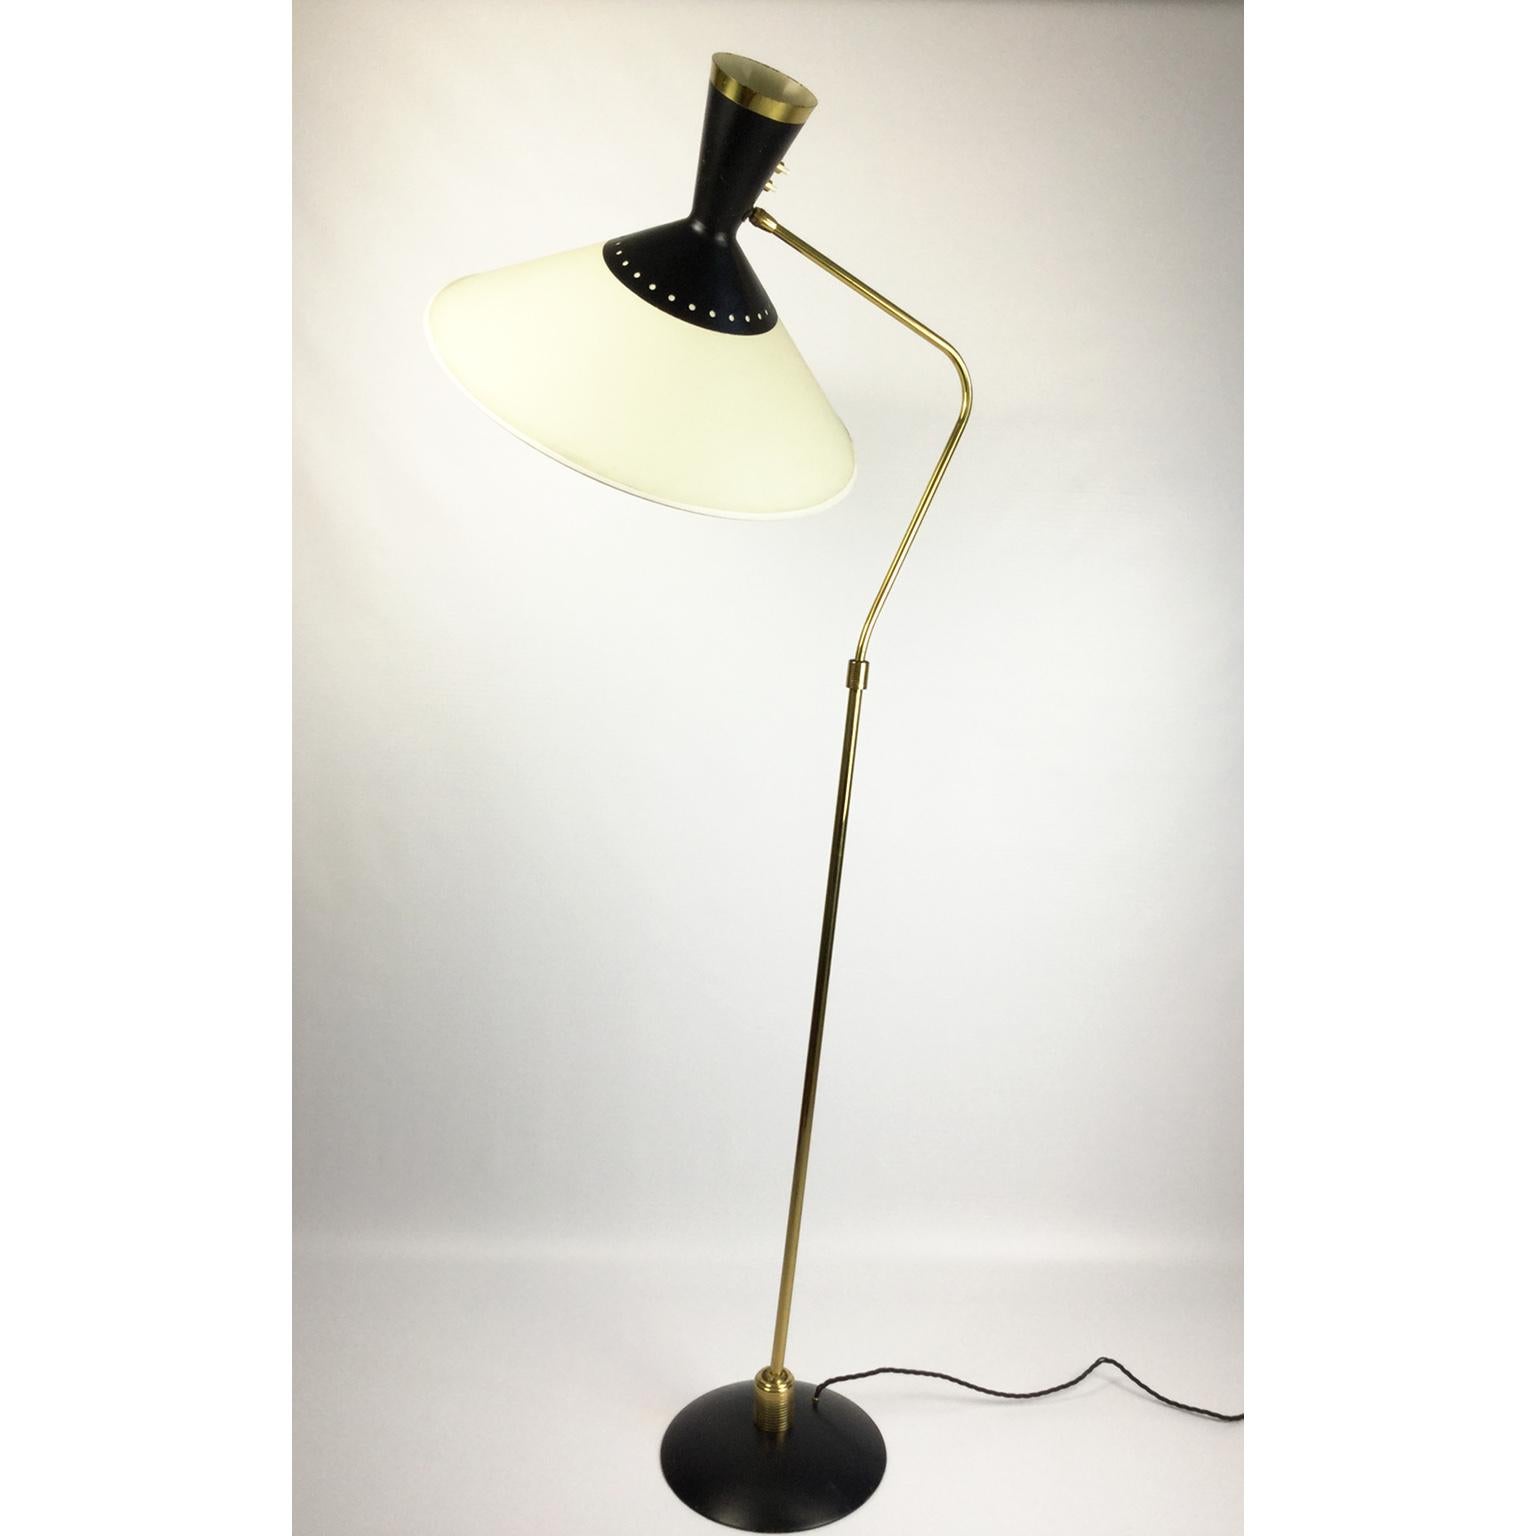 Metalwork French Brass Flexible and Extendable Floor Lamp by Maison Arlus, 1950s For Sale